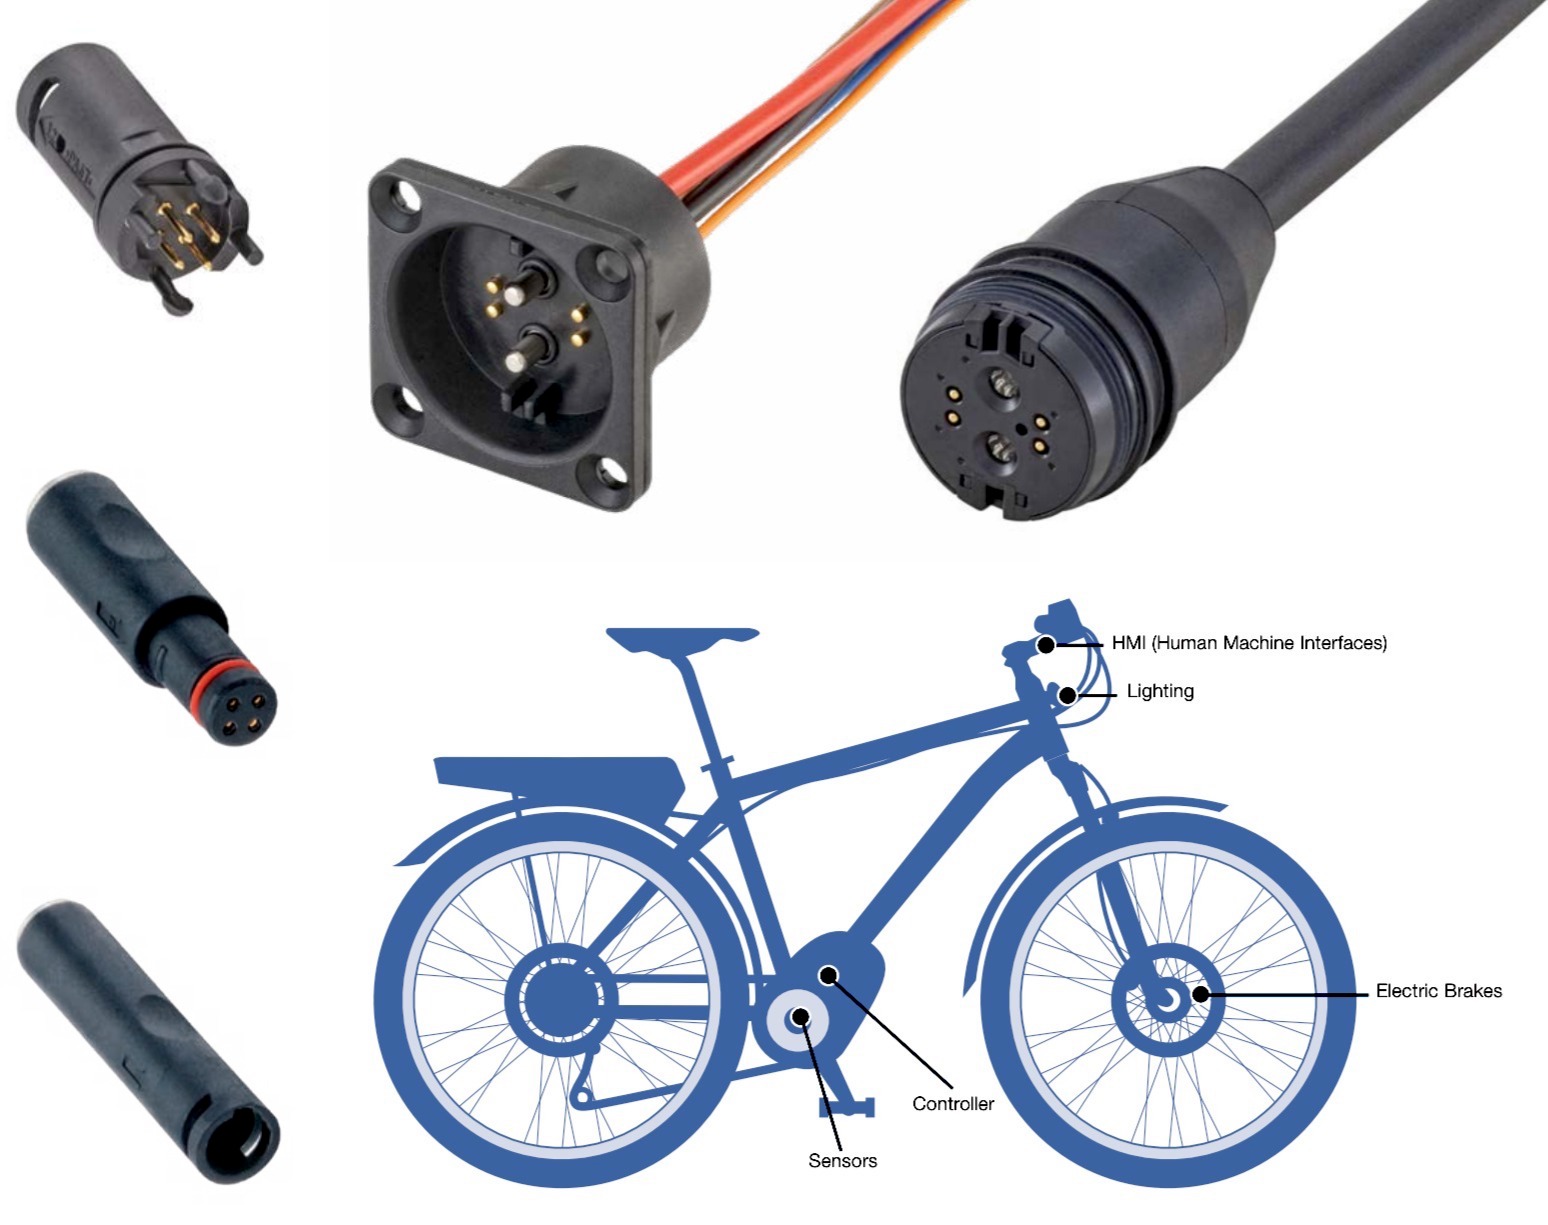 Rosenberger RoPD and RoDC connectors for e-bikes